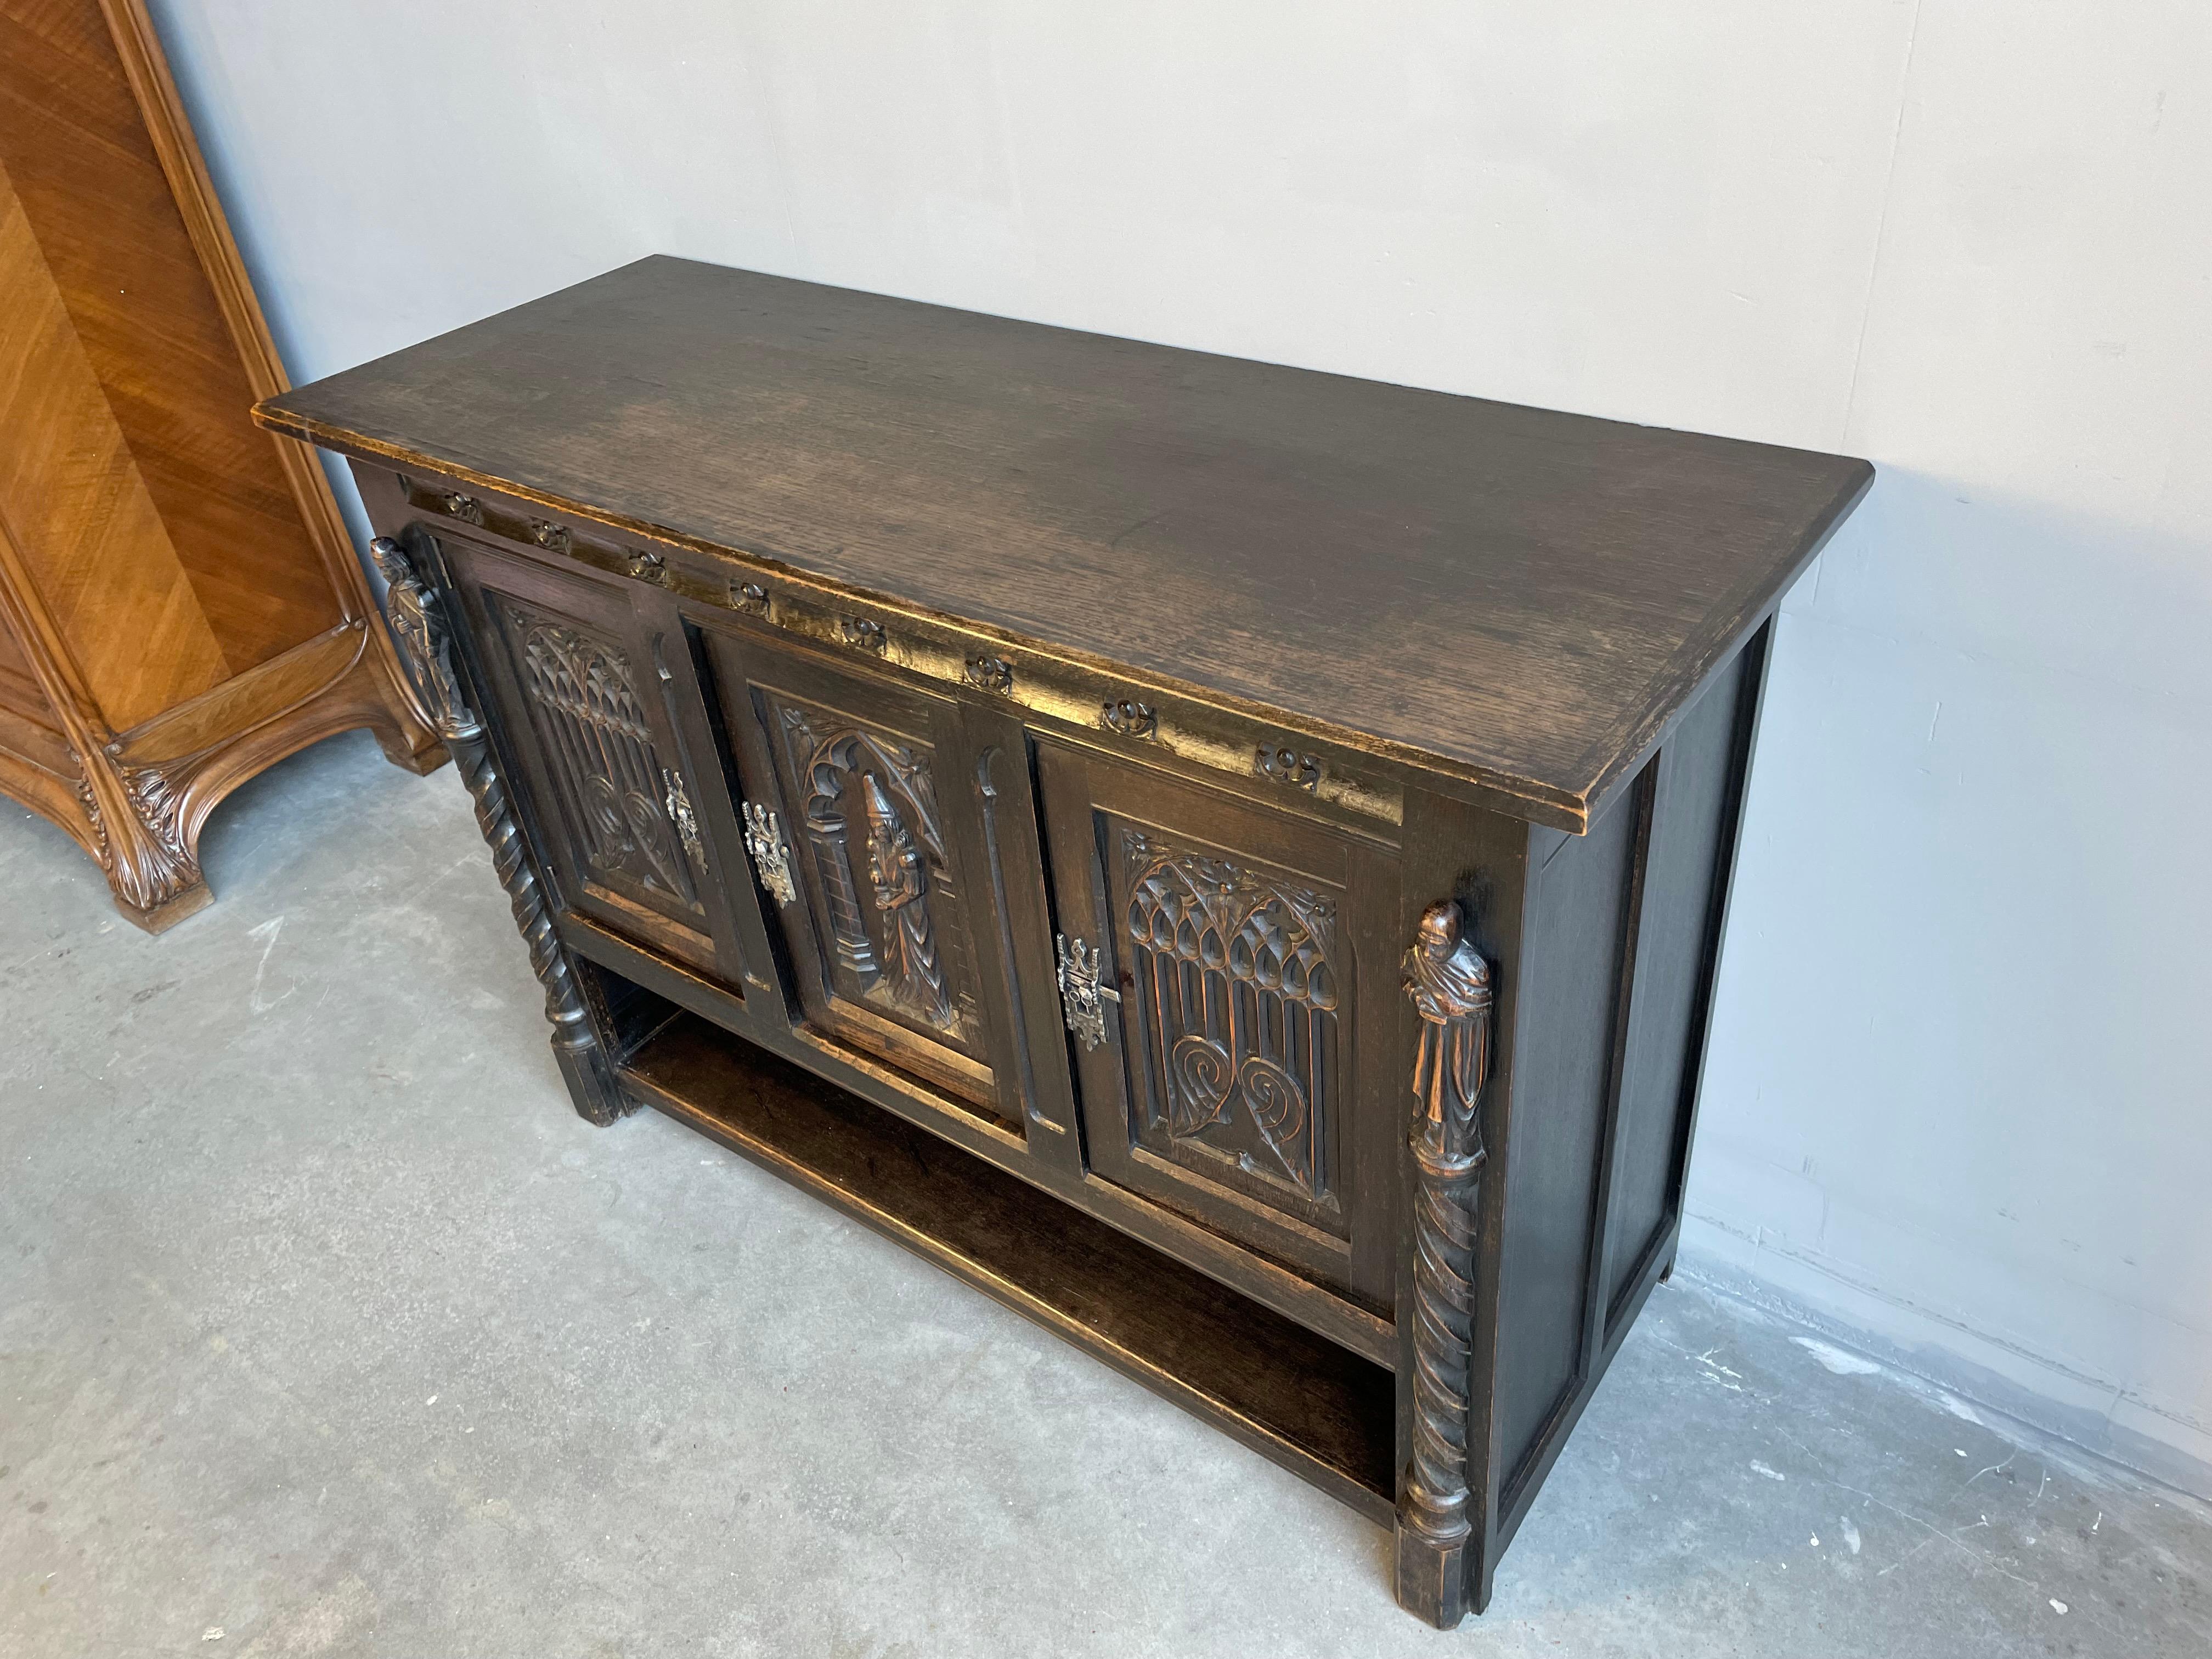 Iron Stunning & Rare Hand Carved & Ebonized Gothic Revival Sideboard / Small Credenza